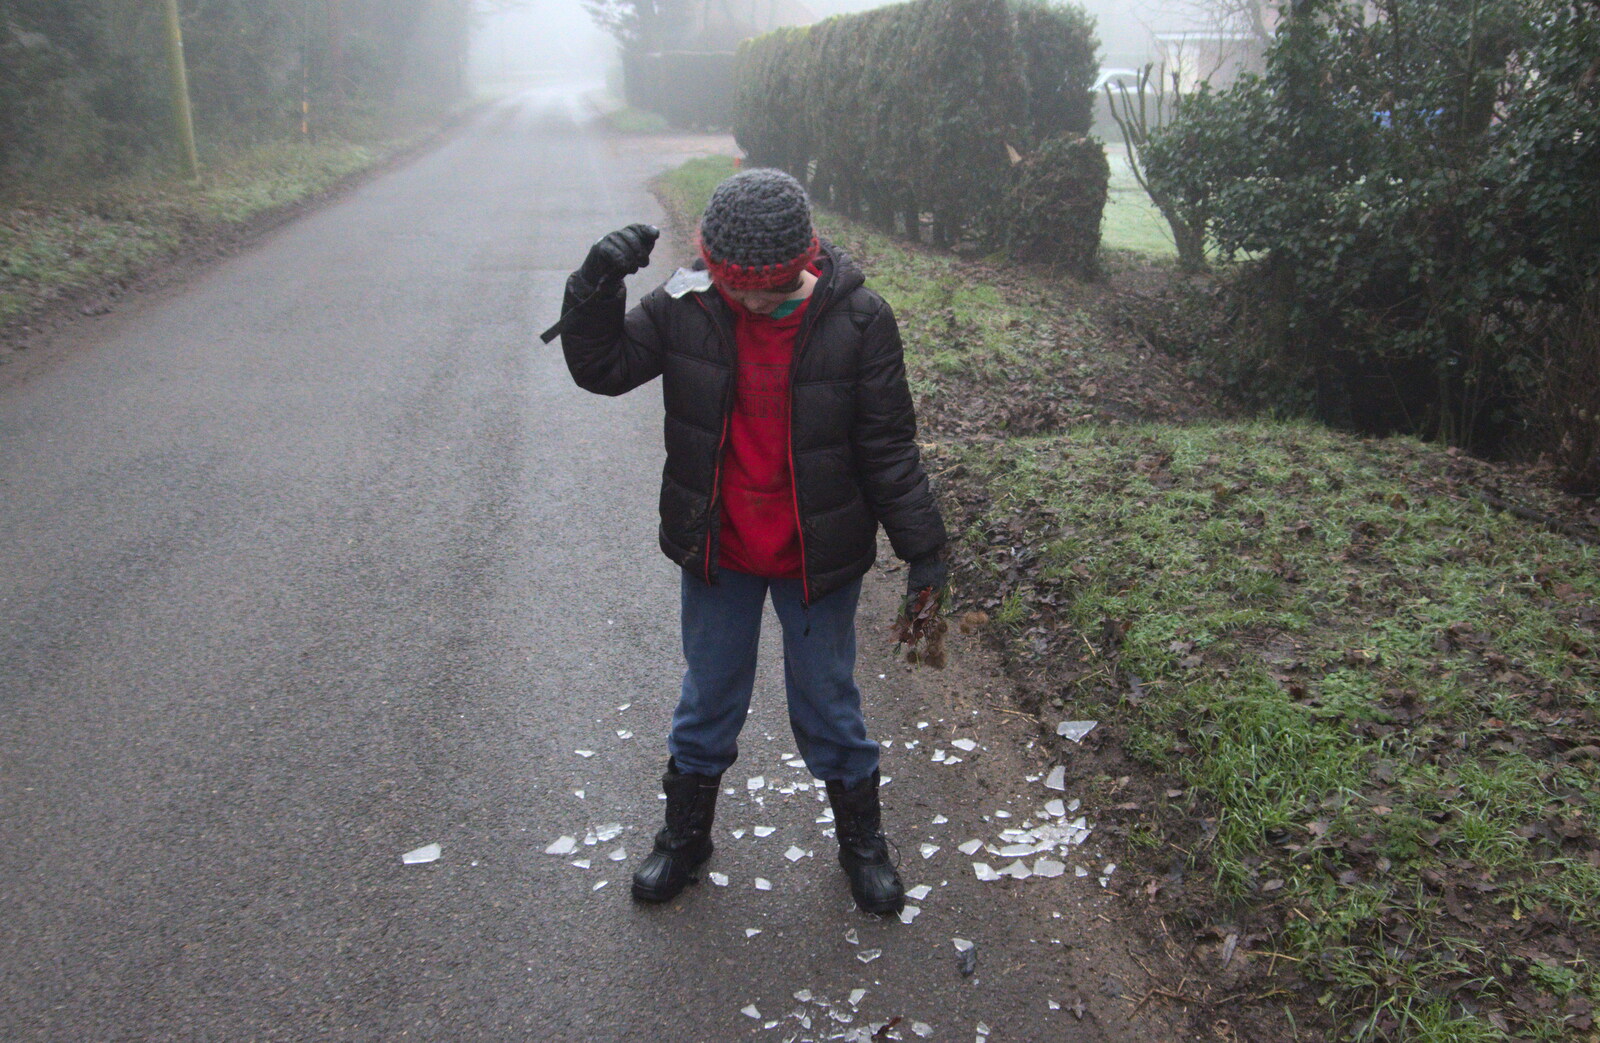 Fred smashes the ice sheet on his head from Fun With Ice in Lockdown, Brome, Suffolk - 10th January 2021